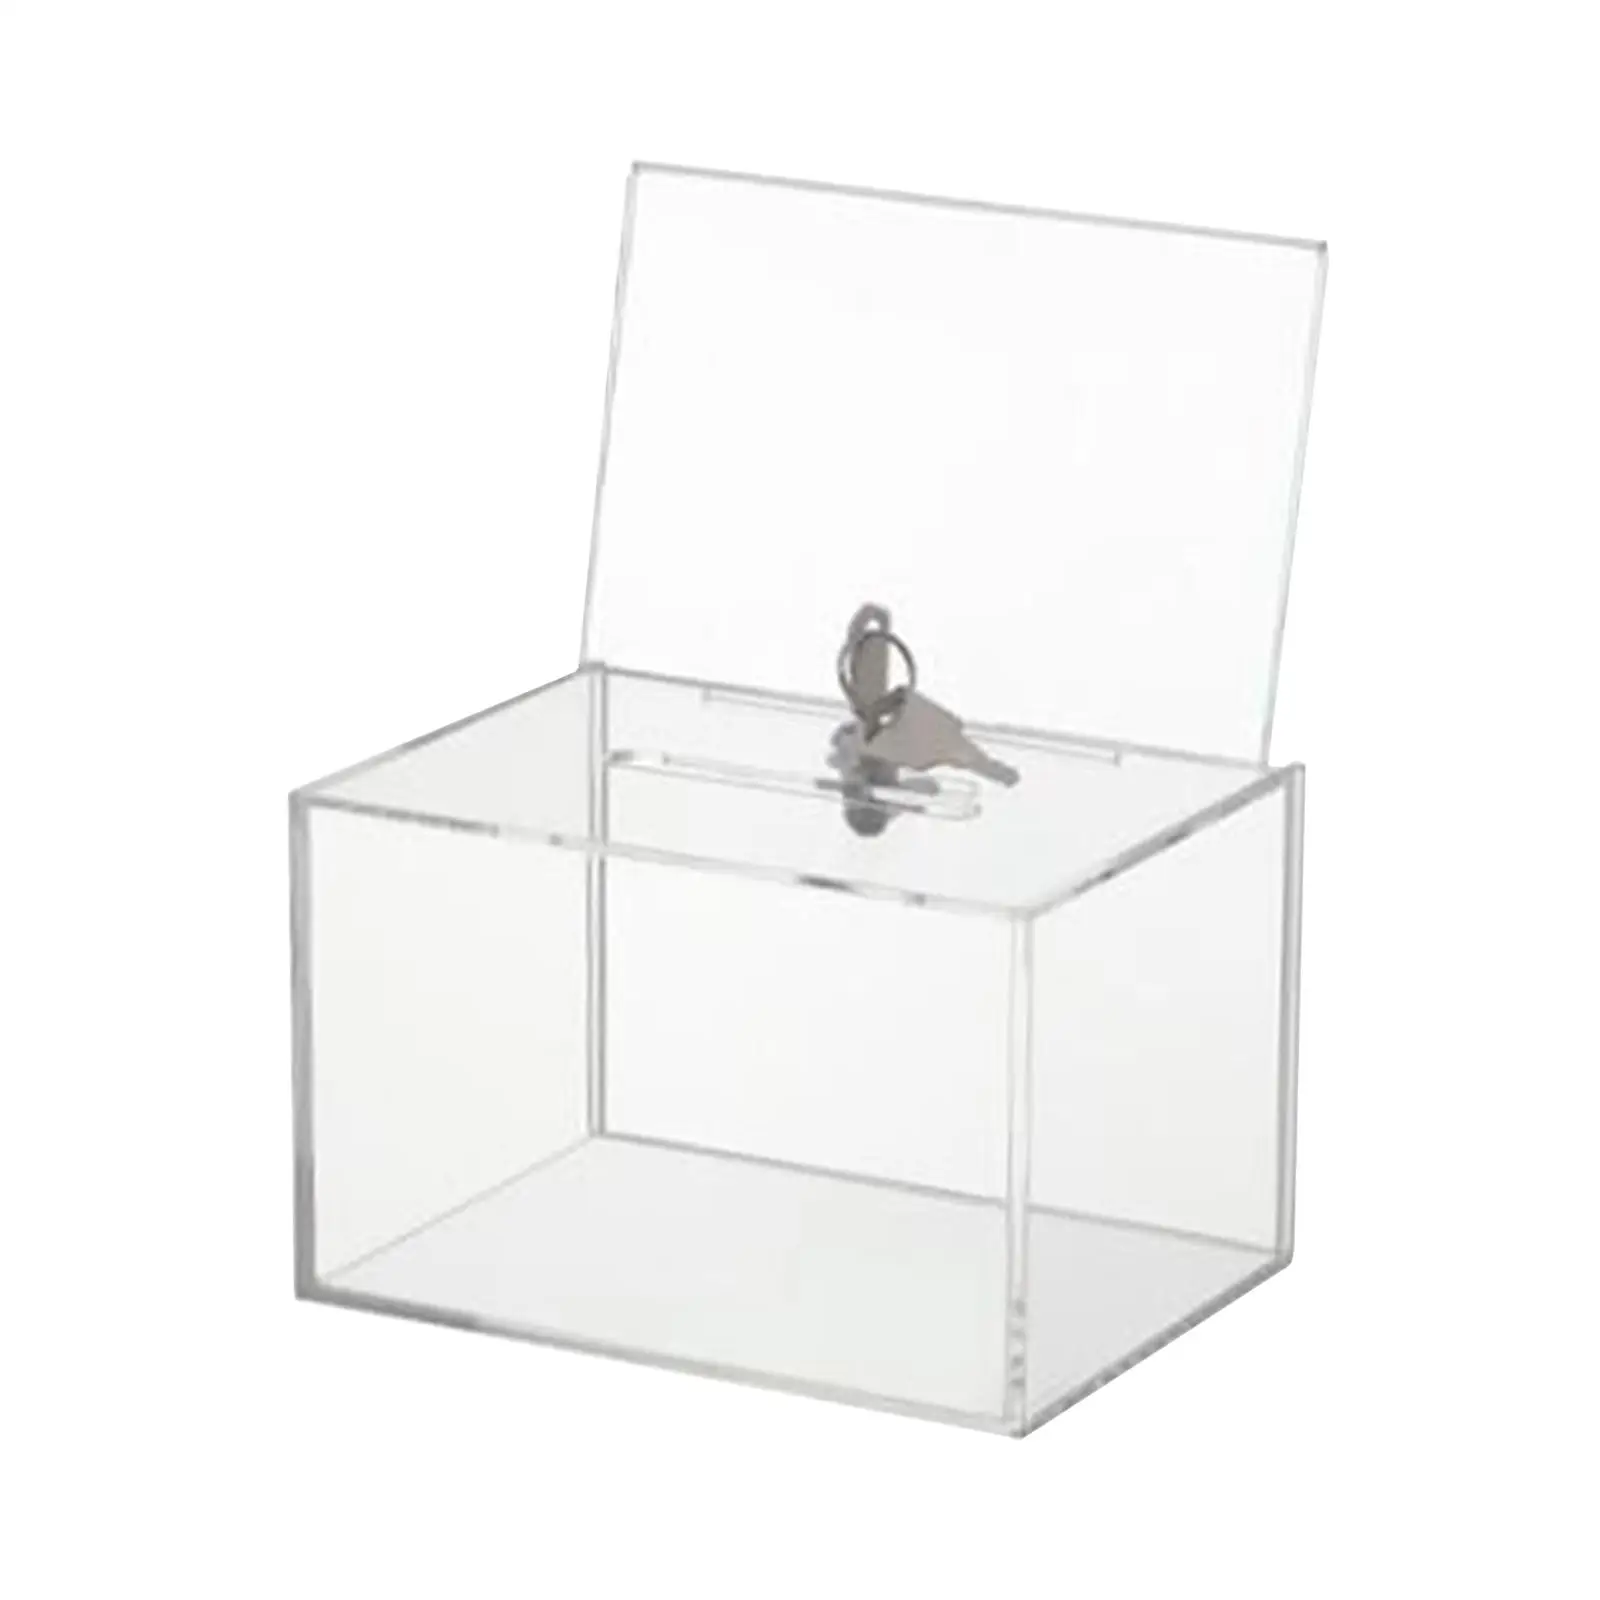 Acrylic Donation Box Post Mail Box Mailbox Letter Post Charity Ticket Container Clear Voting Box for Reception Community Events